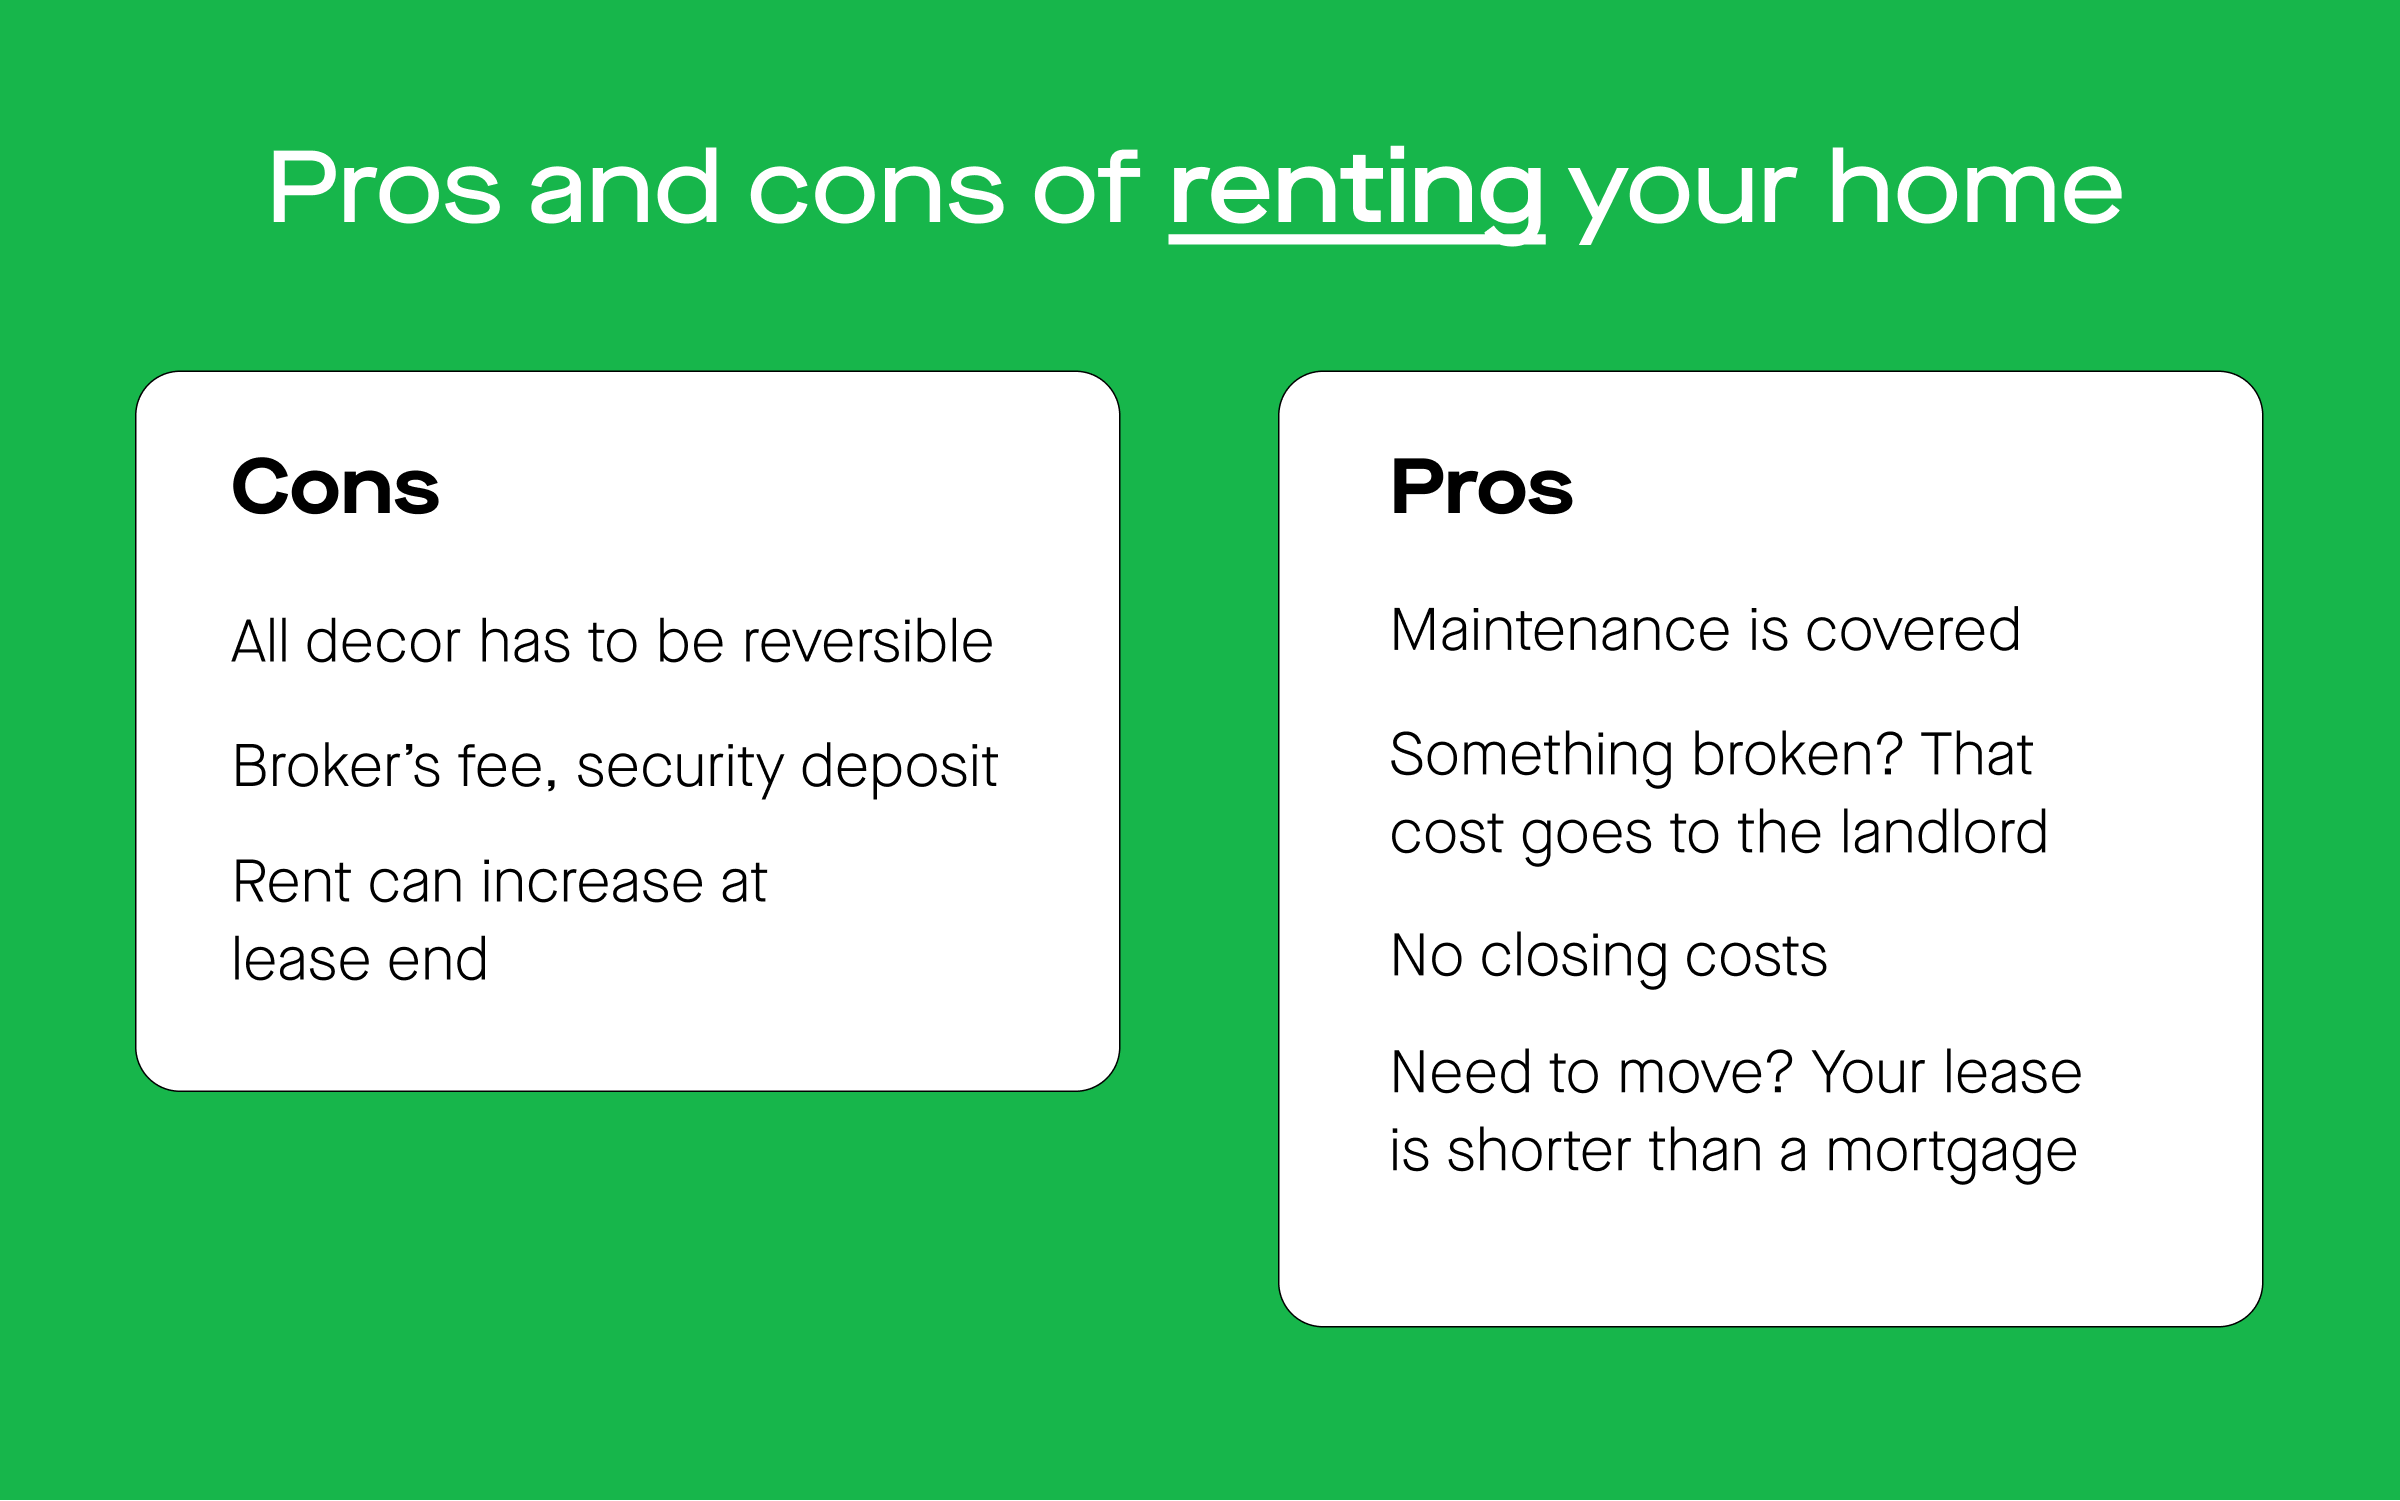 Graphic image of pros and cons of renting your home. "Cons - All decor has to be reversible. Broker